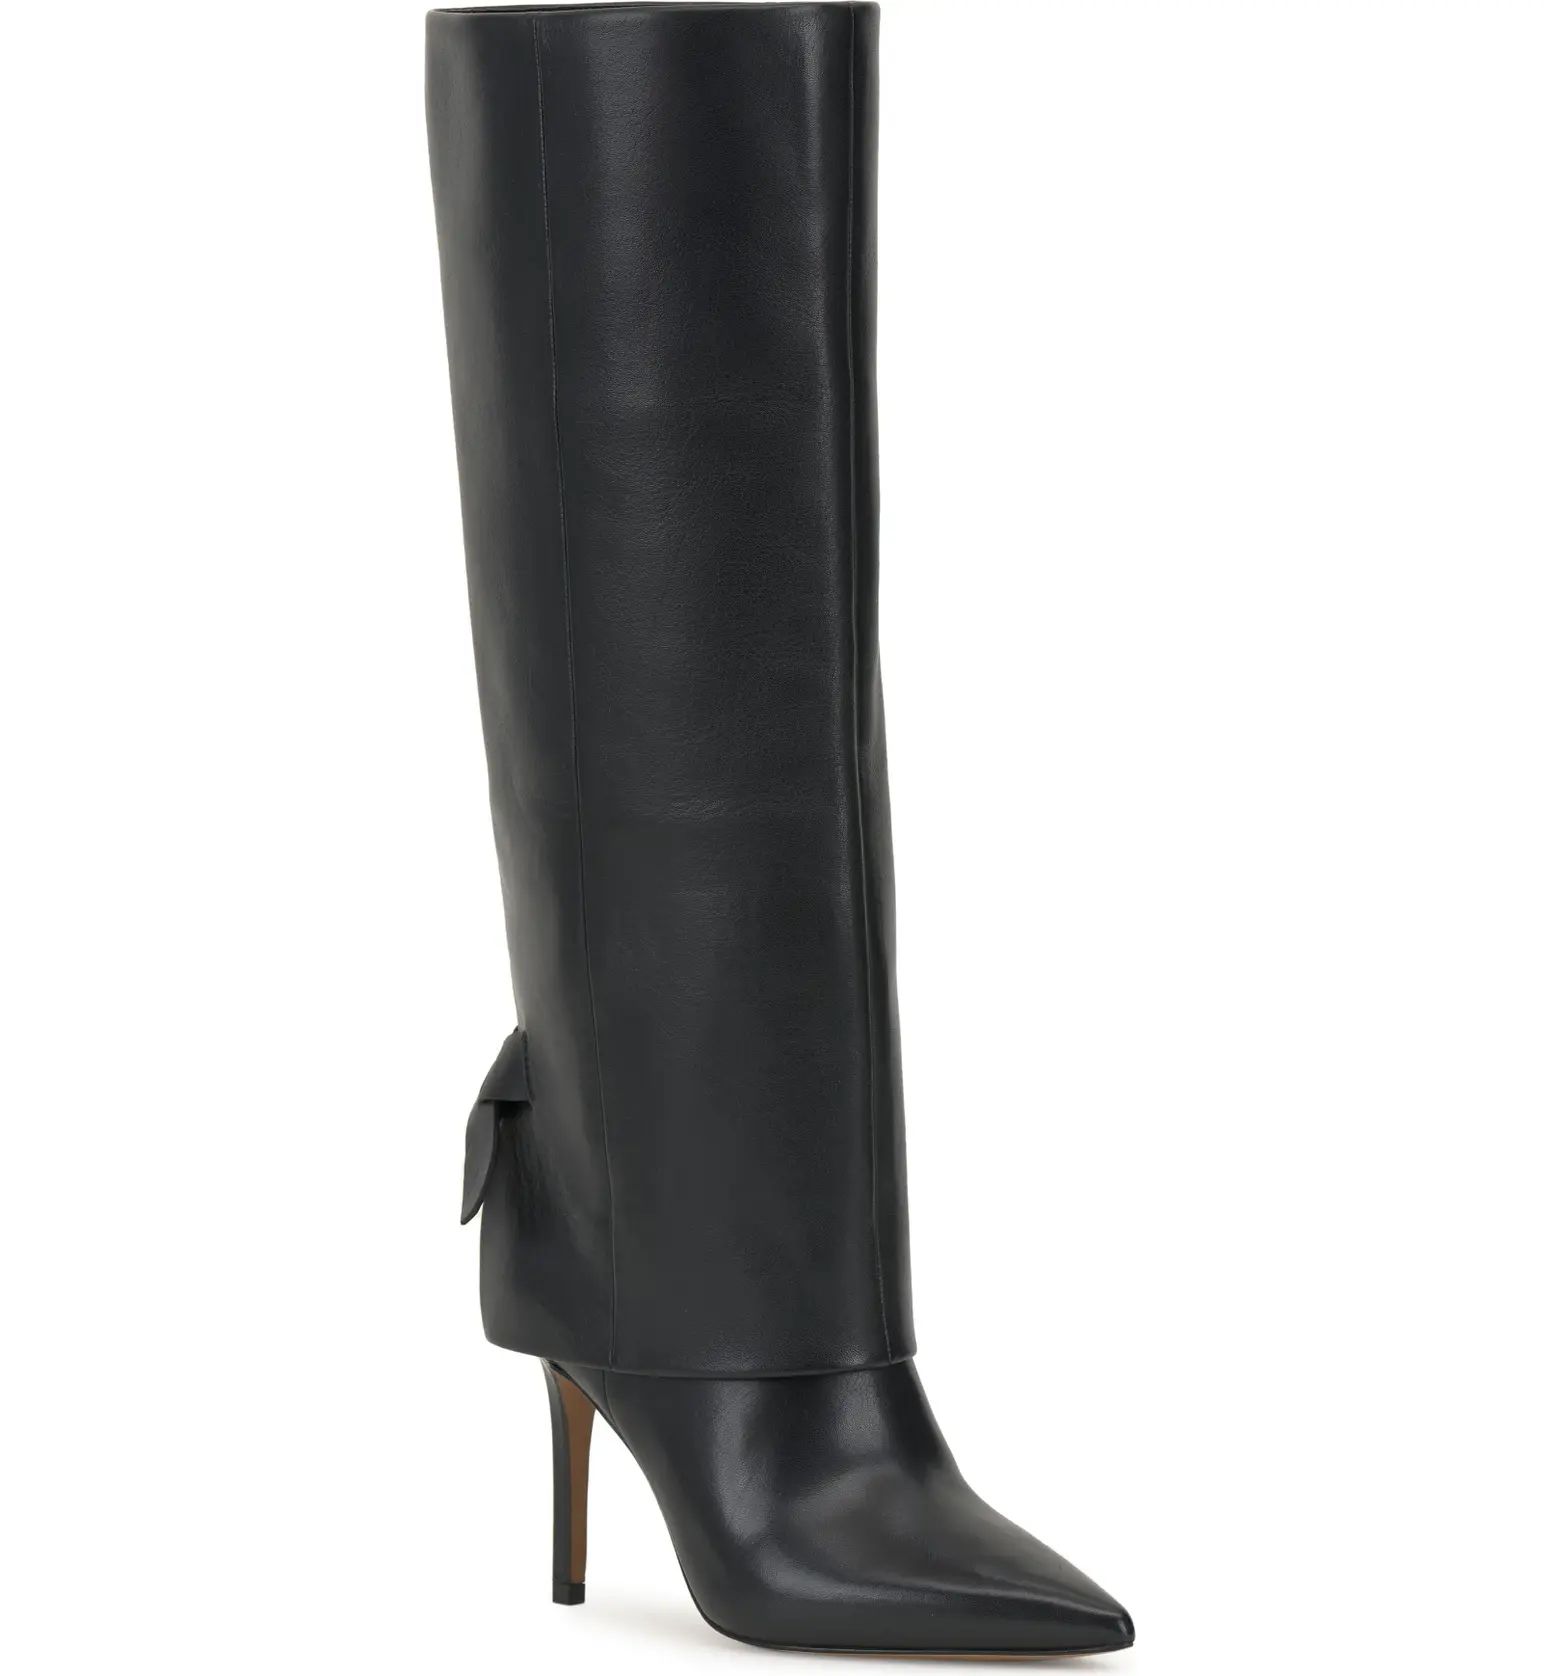 Vince Camuto Kammitie Foldover Pointed Toe Knee High Boot (Women) | Nordstrom | Nordstrom